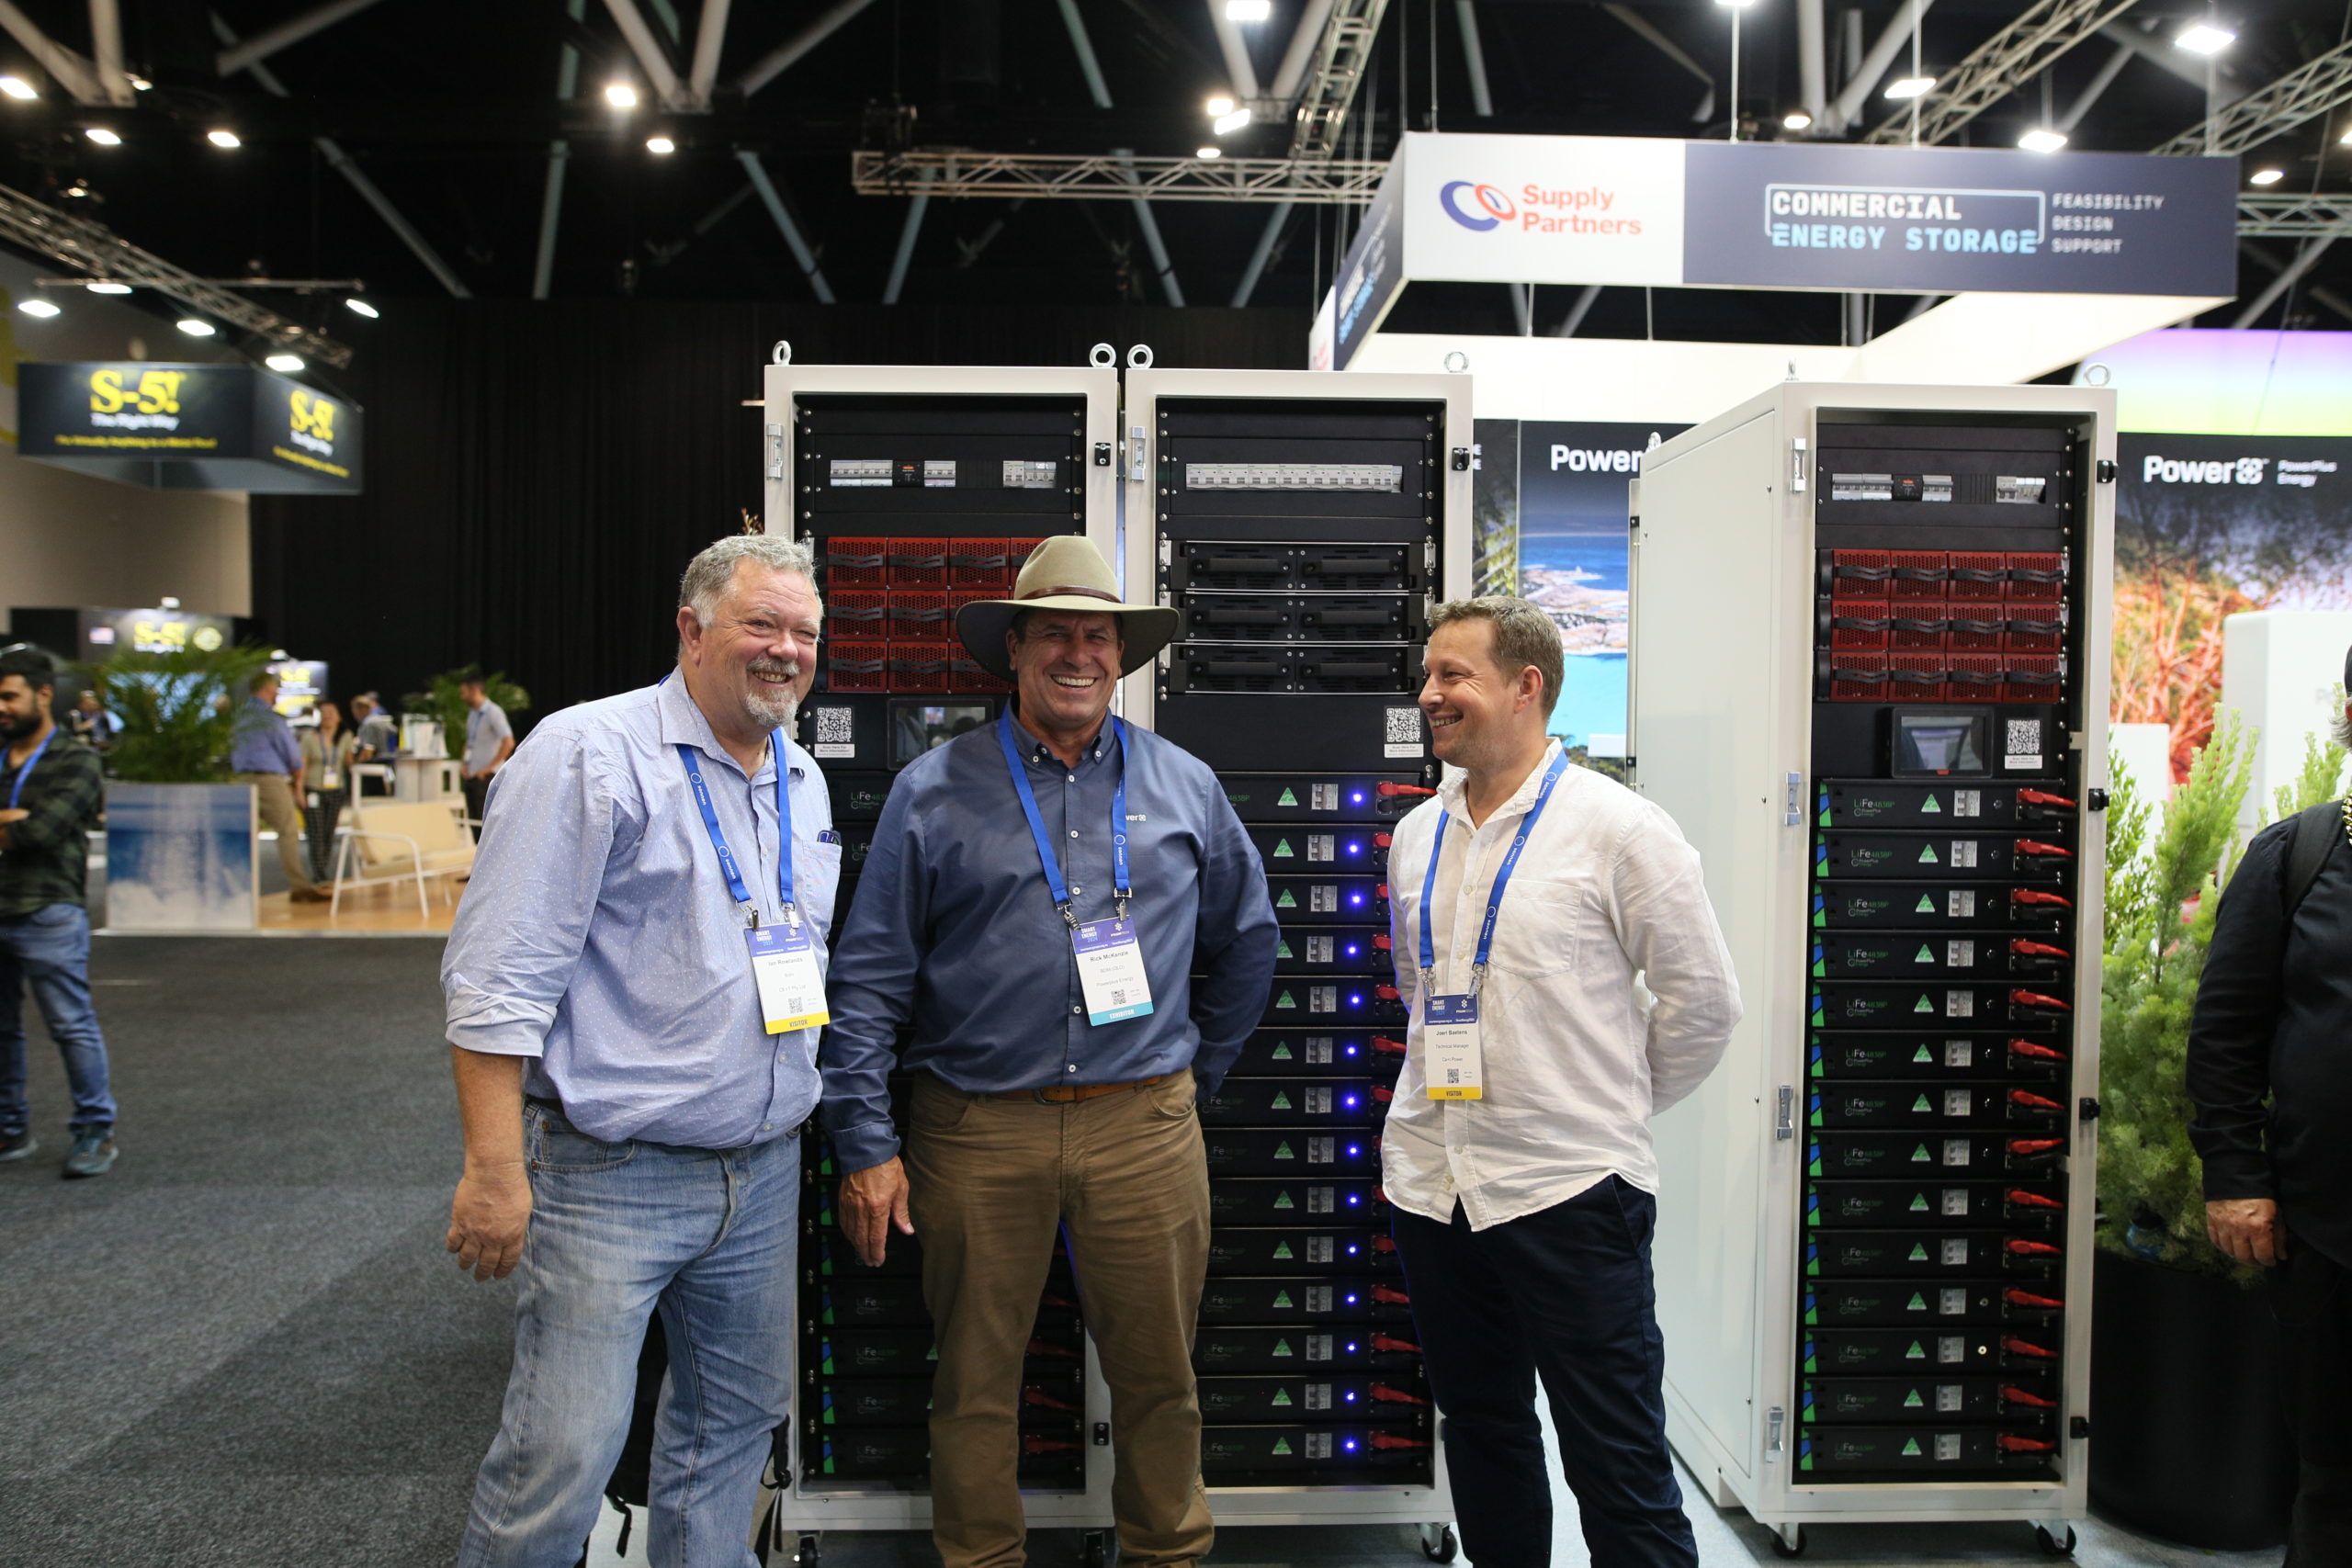 CE+T Team Joeri and Ian with Power Plus during exhbition with Sierra cabinet